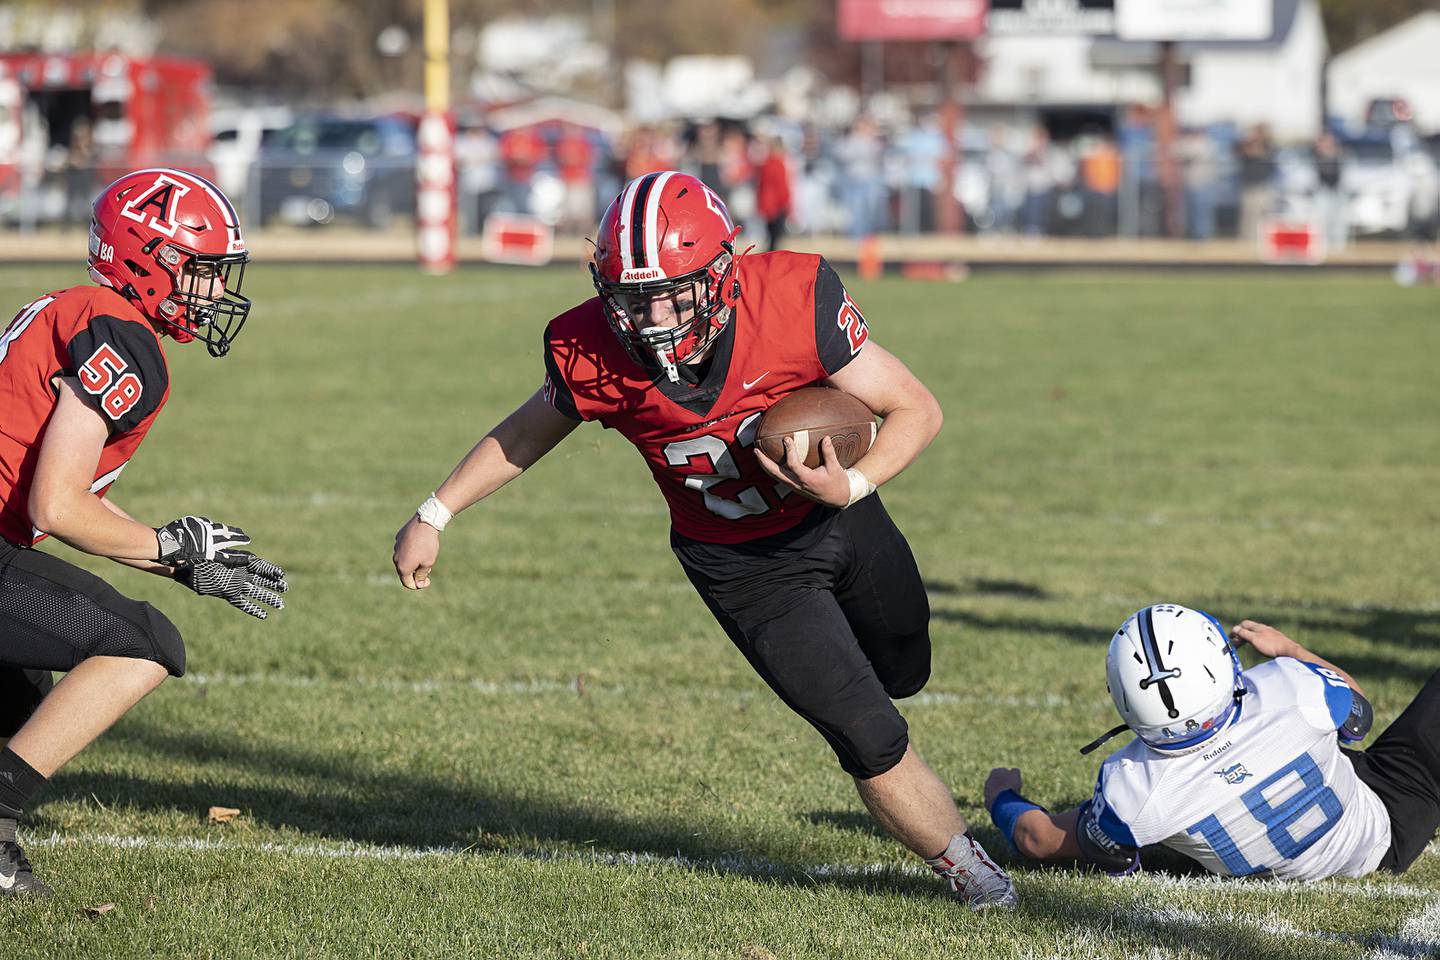 Amboy’s Quinn Leffelman picks up yards in the second quarter of the Clippers’ first round playoff game Saturday, Oct. 29, 2022 against Blue Ridge.